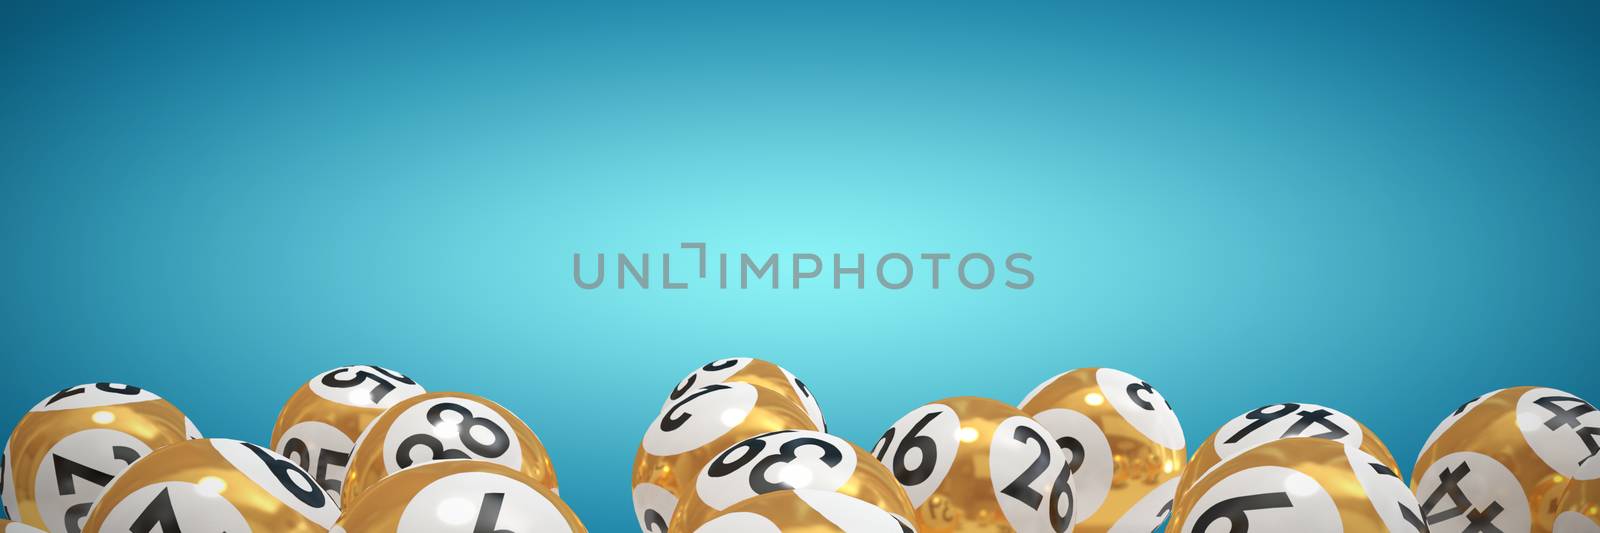 Composite image of lottery balls with nimbers by Wavebreakmedia